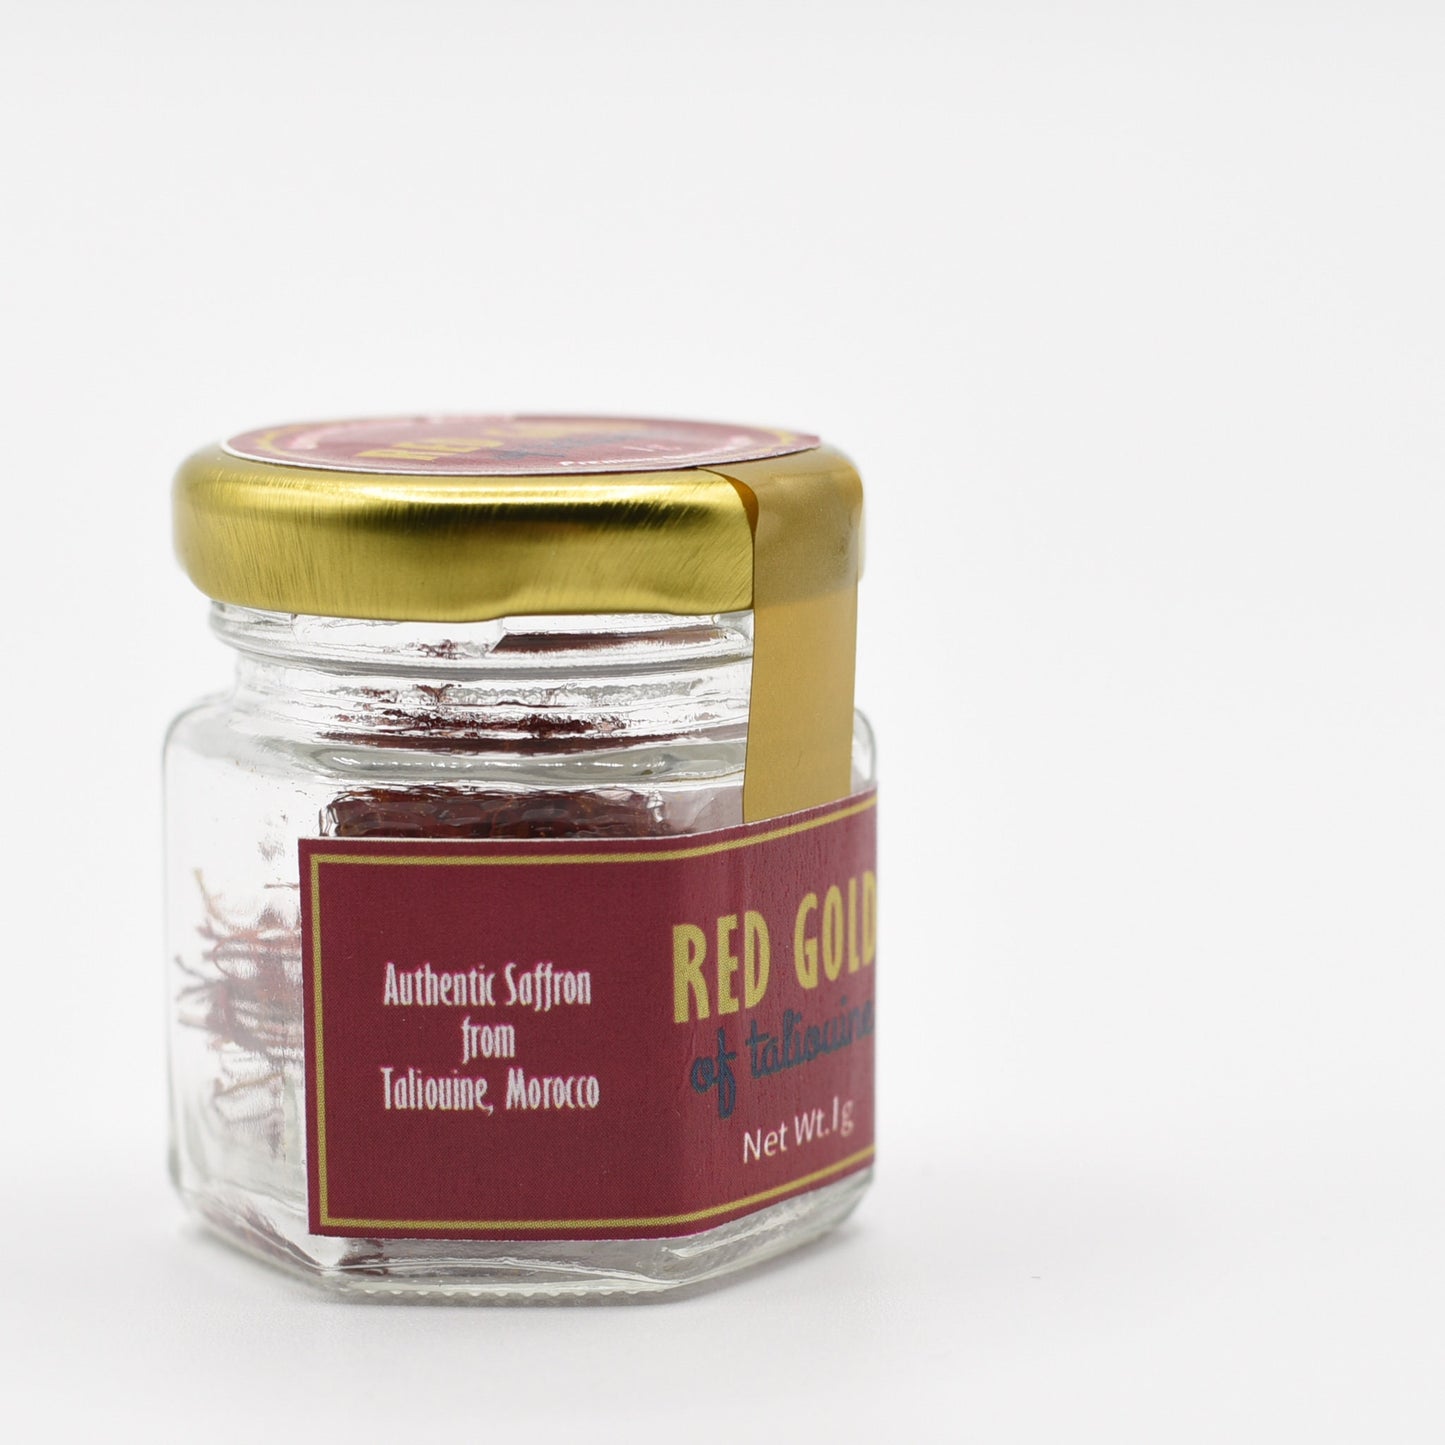 PURE Moroccan Taliouine Saffron Premium Quality No.1 in The World, RED GOLD-For Pilaf, Rice, Teas, Medicinal